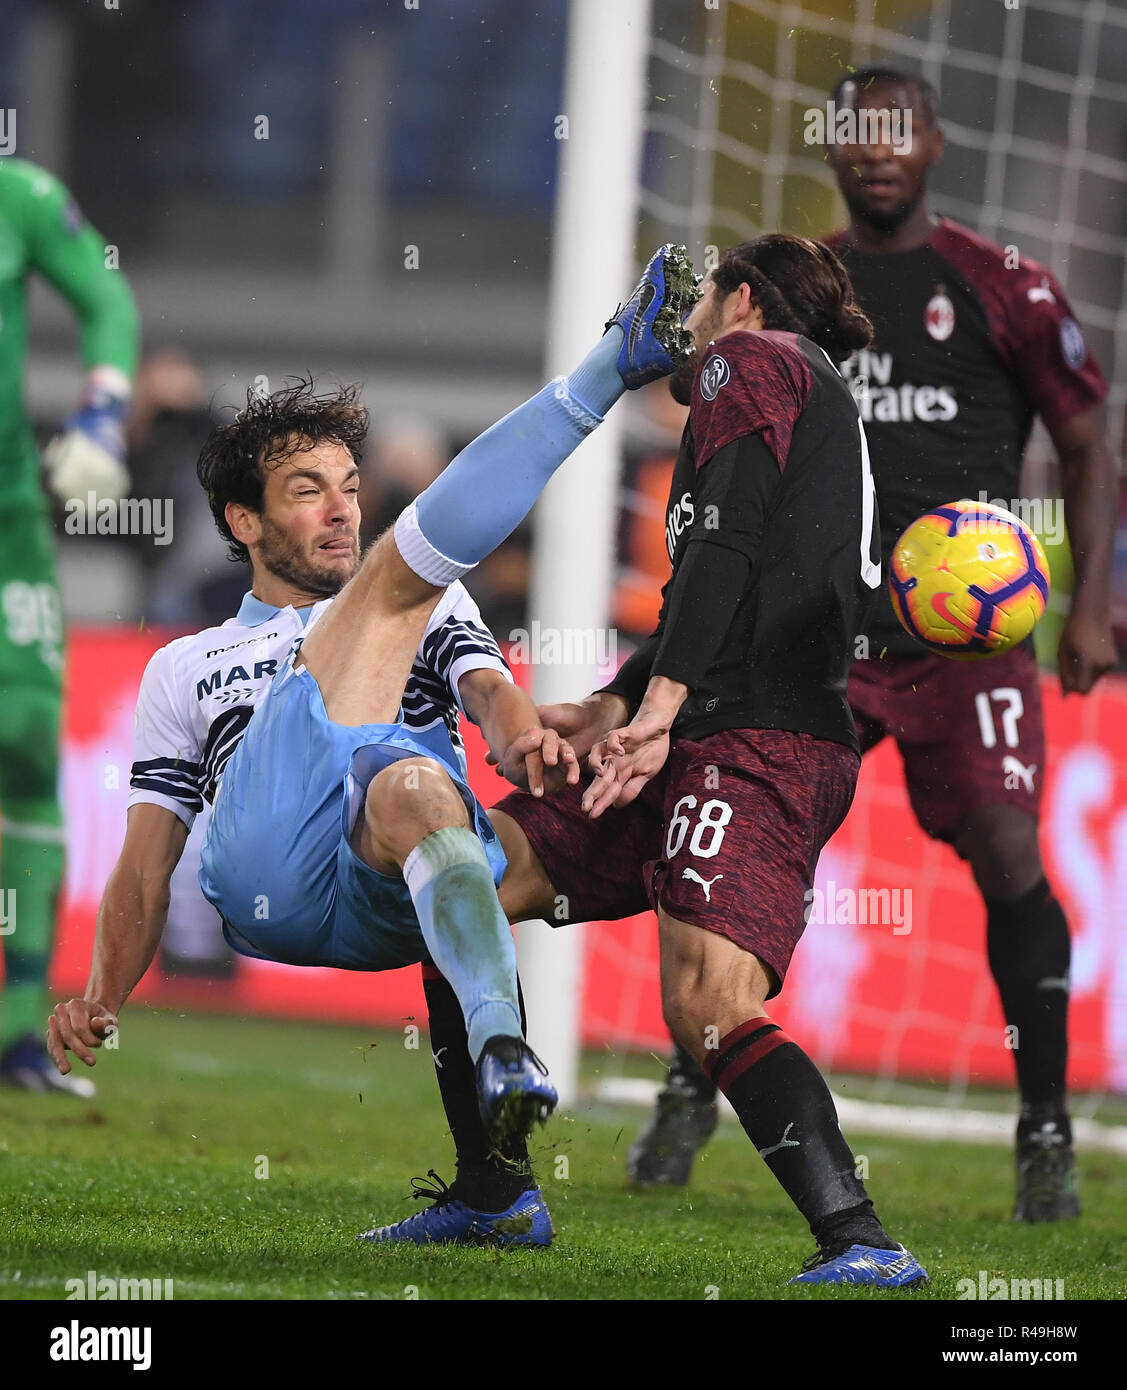 Rome, Italy. 25th Nov, 2018. Lazio's Marco Parolo (L) vies with AC Milan's Ricardo Rodriguez (C) during the Serie A soccer match between Lazio and AC Milan in Rome, Italy, Nov. 25, 2018. The match ended with a 1-1 draw. Credit: Alberto Lingria/Xinhua/Alamy Live News Stock Photo